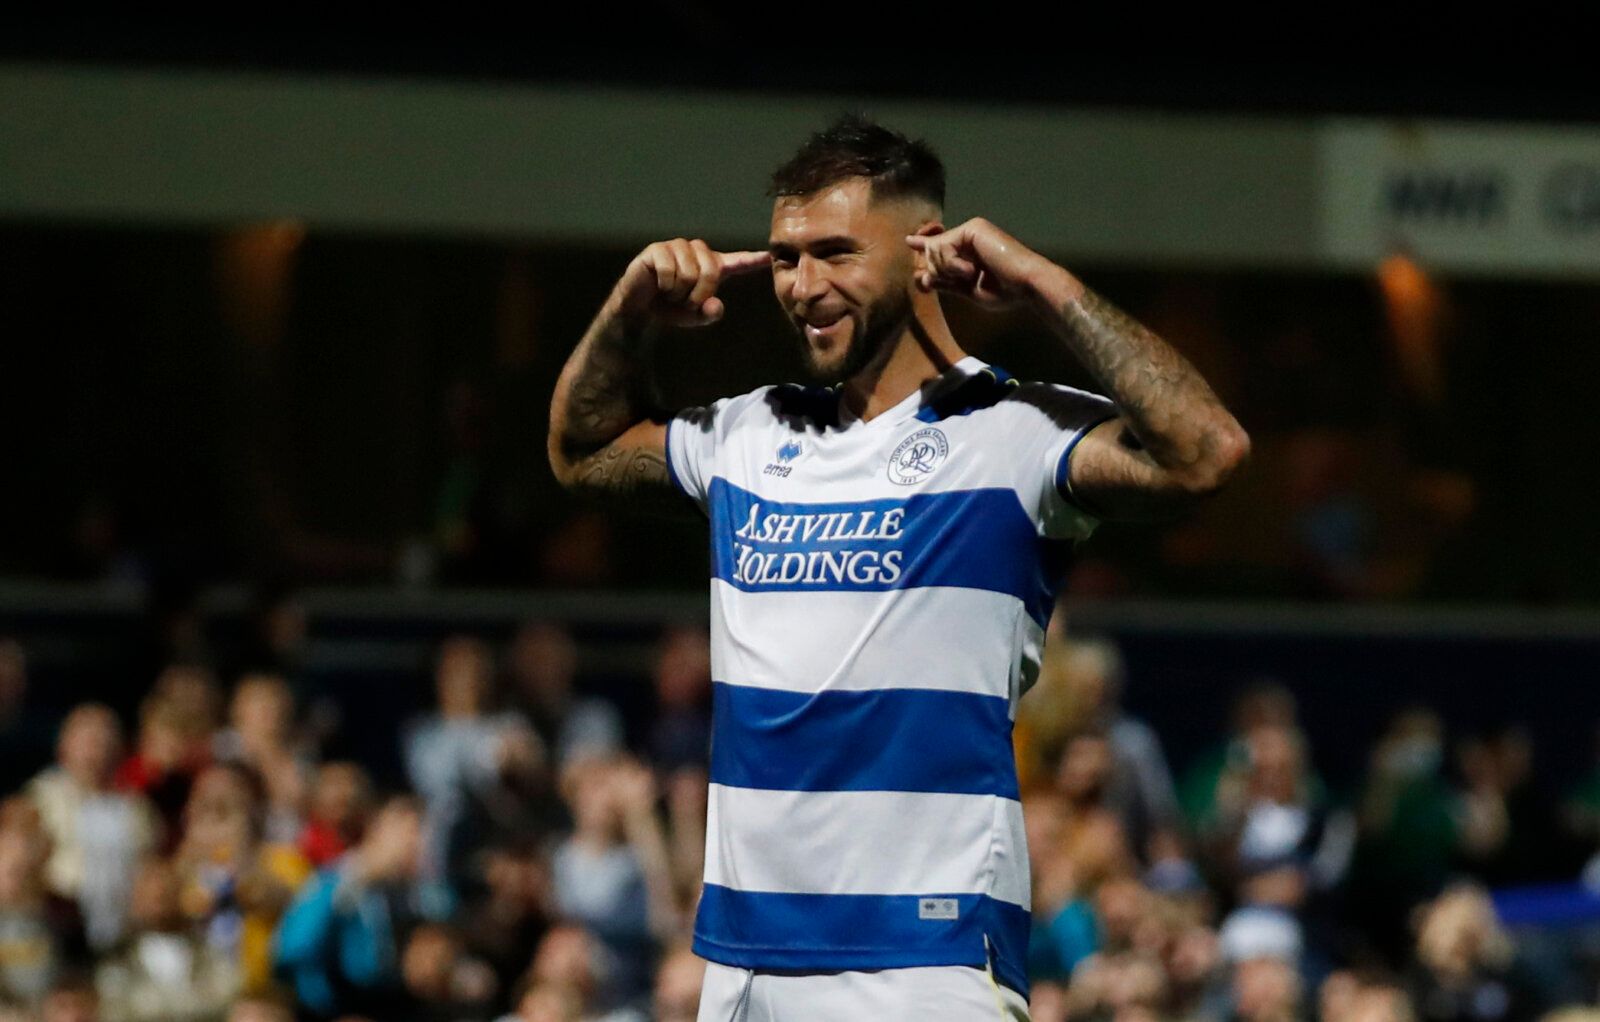 Soccer Football - Carabao Cup - Third Round - Queens Park Rangers v Everton - Loftus Road, London, Britain - September 21, 2021  Queens Park Rangers' Charlie Austin celebrates after scoring his penalty during the shoot-out Action Images via Reuters/Peter Cziborra EDITORIAL USE ONLY. No use with unauthorized audio, video, data, fixture lists, club/league logos or 'live' services. Online in-match use limited to 75 images, no video emulation. No use in betting, games or single club /league/player p